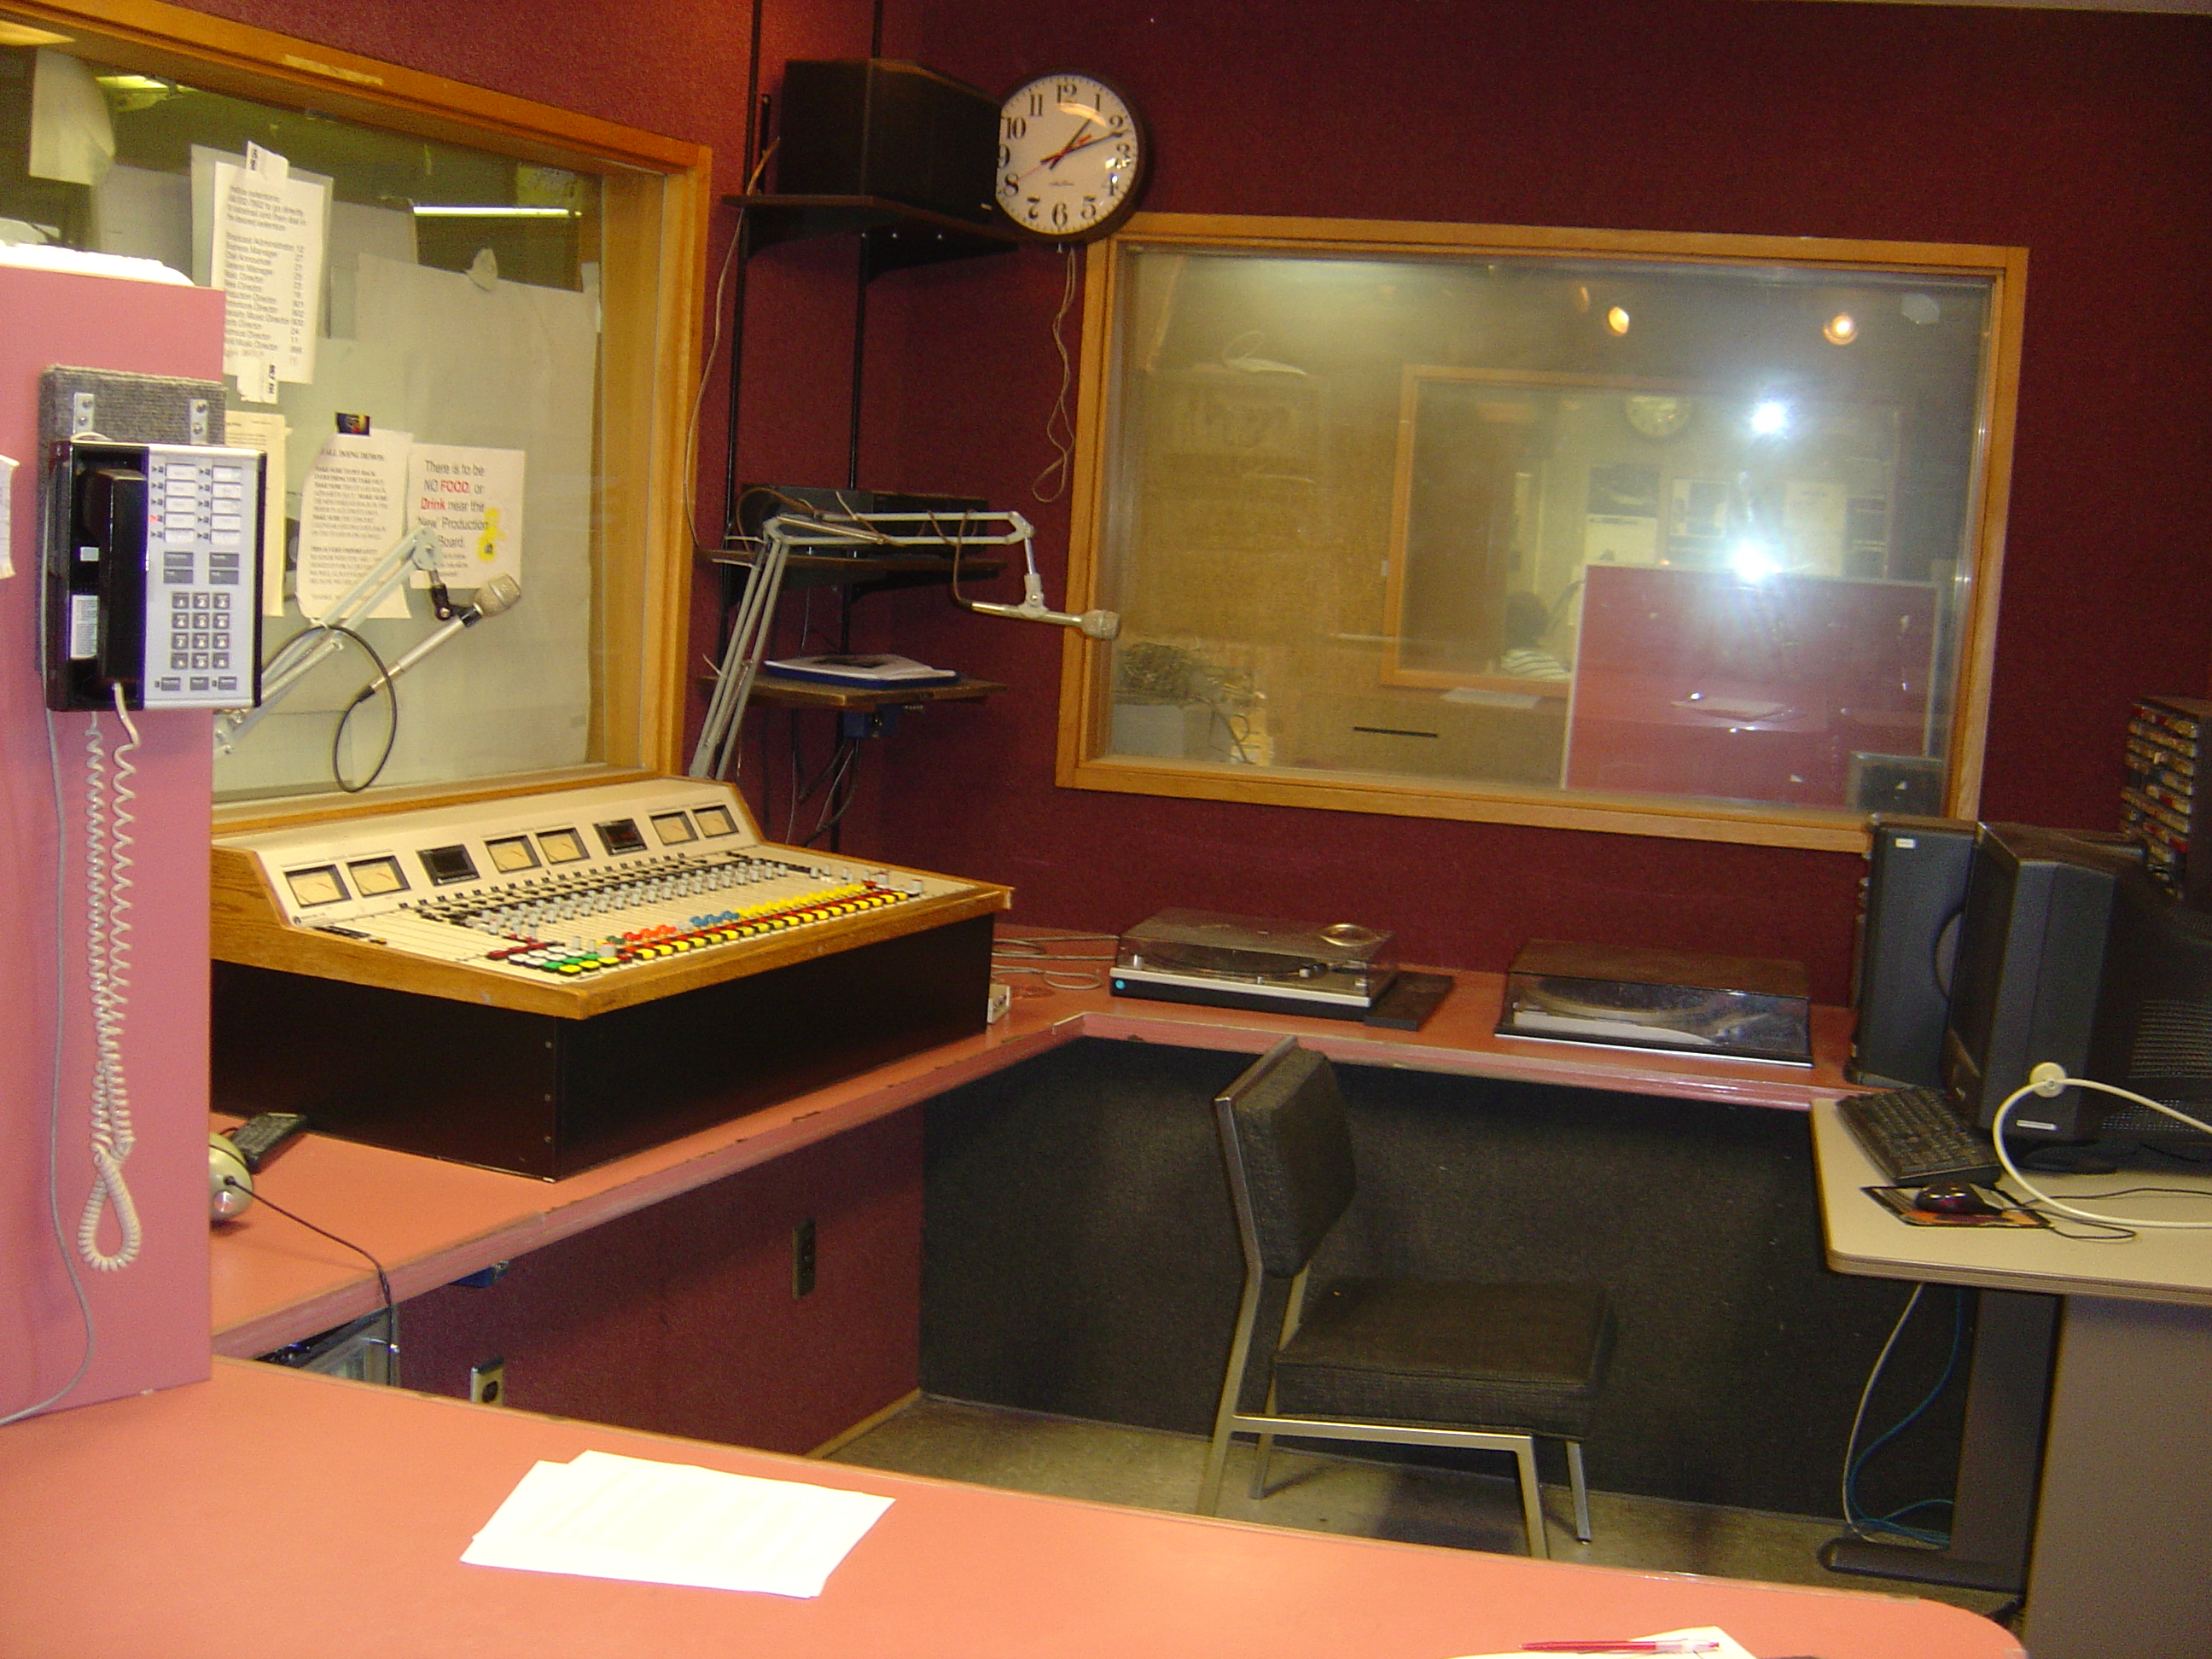 Production 2007 - The Temporary FM Control - AKA Production.